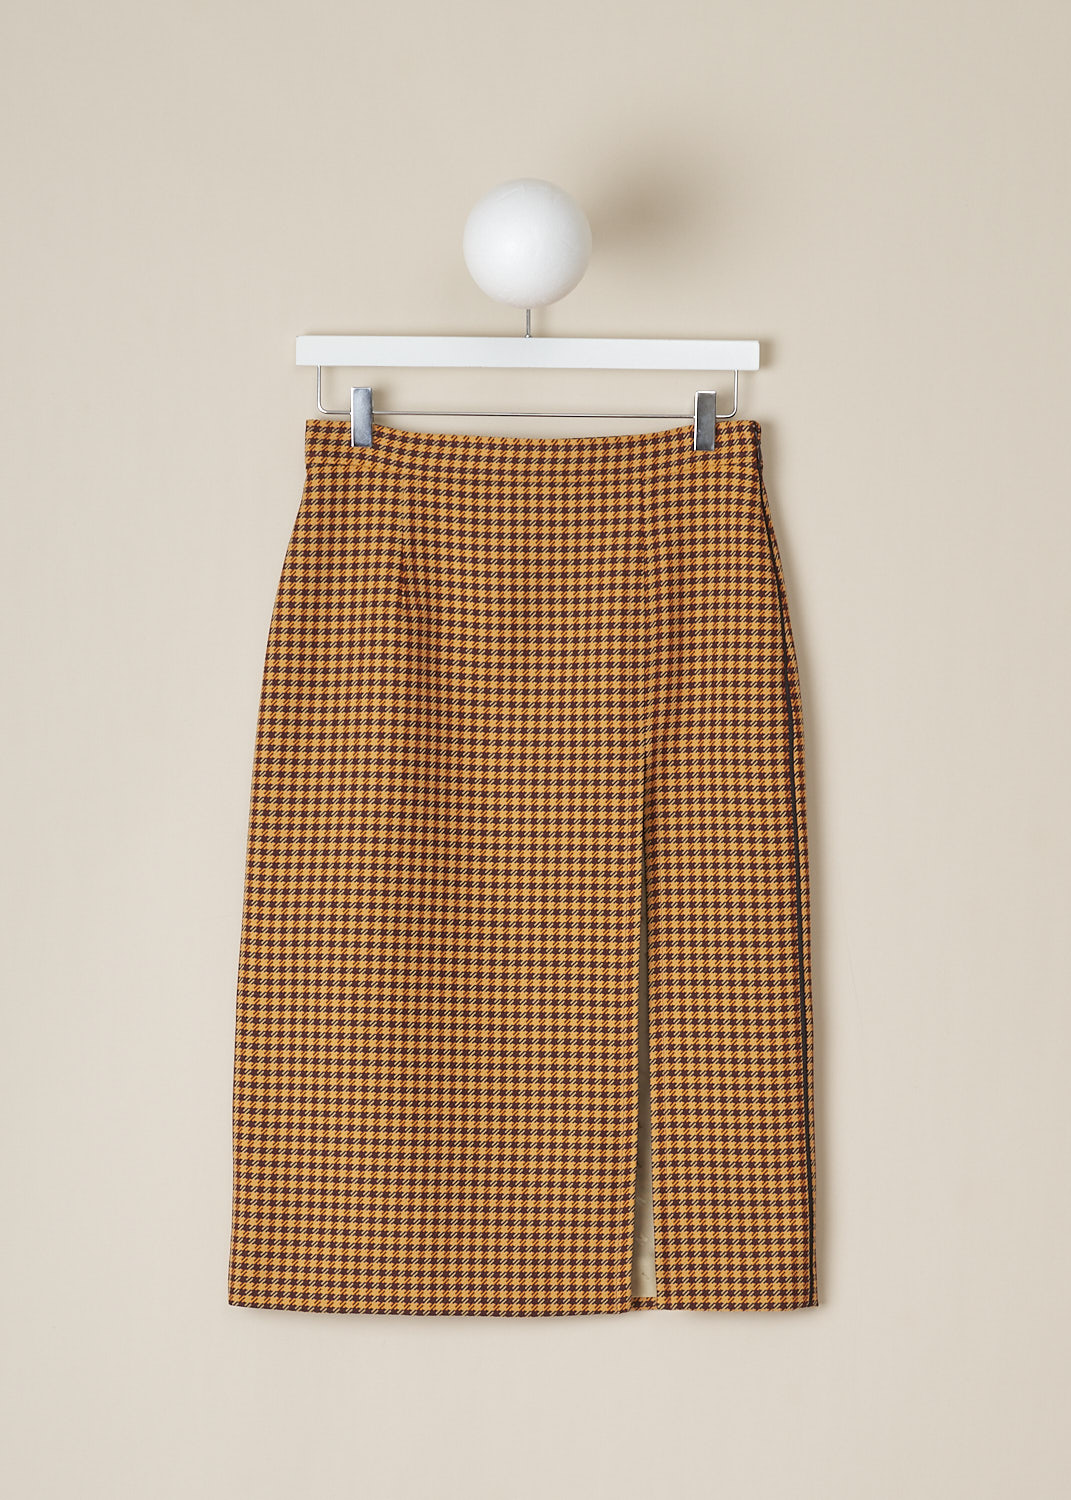 MARNI, ORANGE HOUNDSTOOTH MIDI SKIRT, 
GOMA0554IU_UTP730_CHR79, Orange, Print, Front, This high-waisted orange Houndstooth midi skirt has a narrow waistband and a concealed side zip that functions as the closure option. Black piping runs along the side seams. In the front, the skirt has a high slit. The skirt has a straight hemline. 
